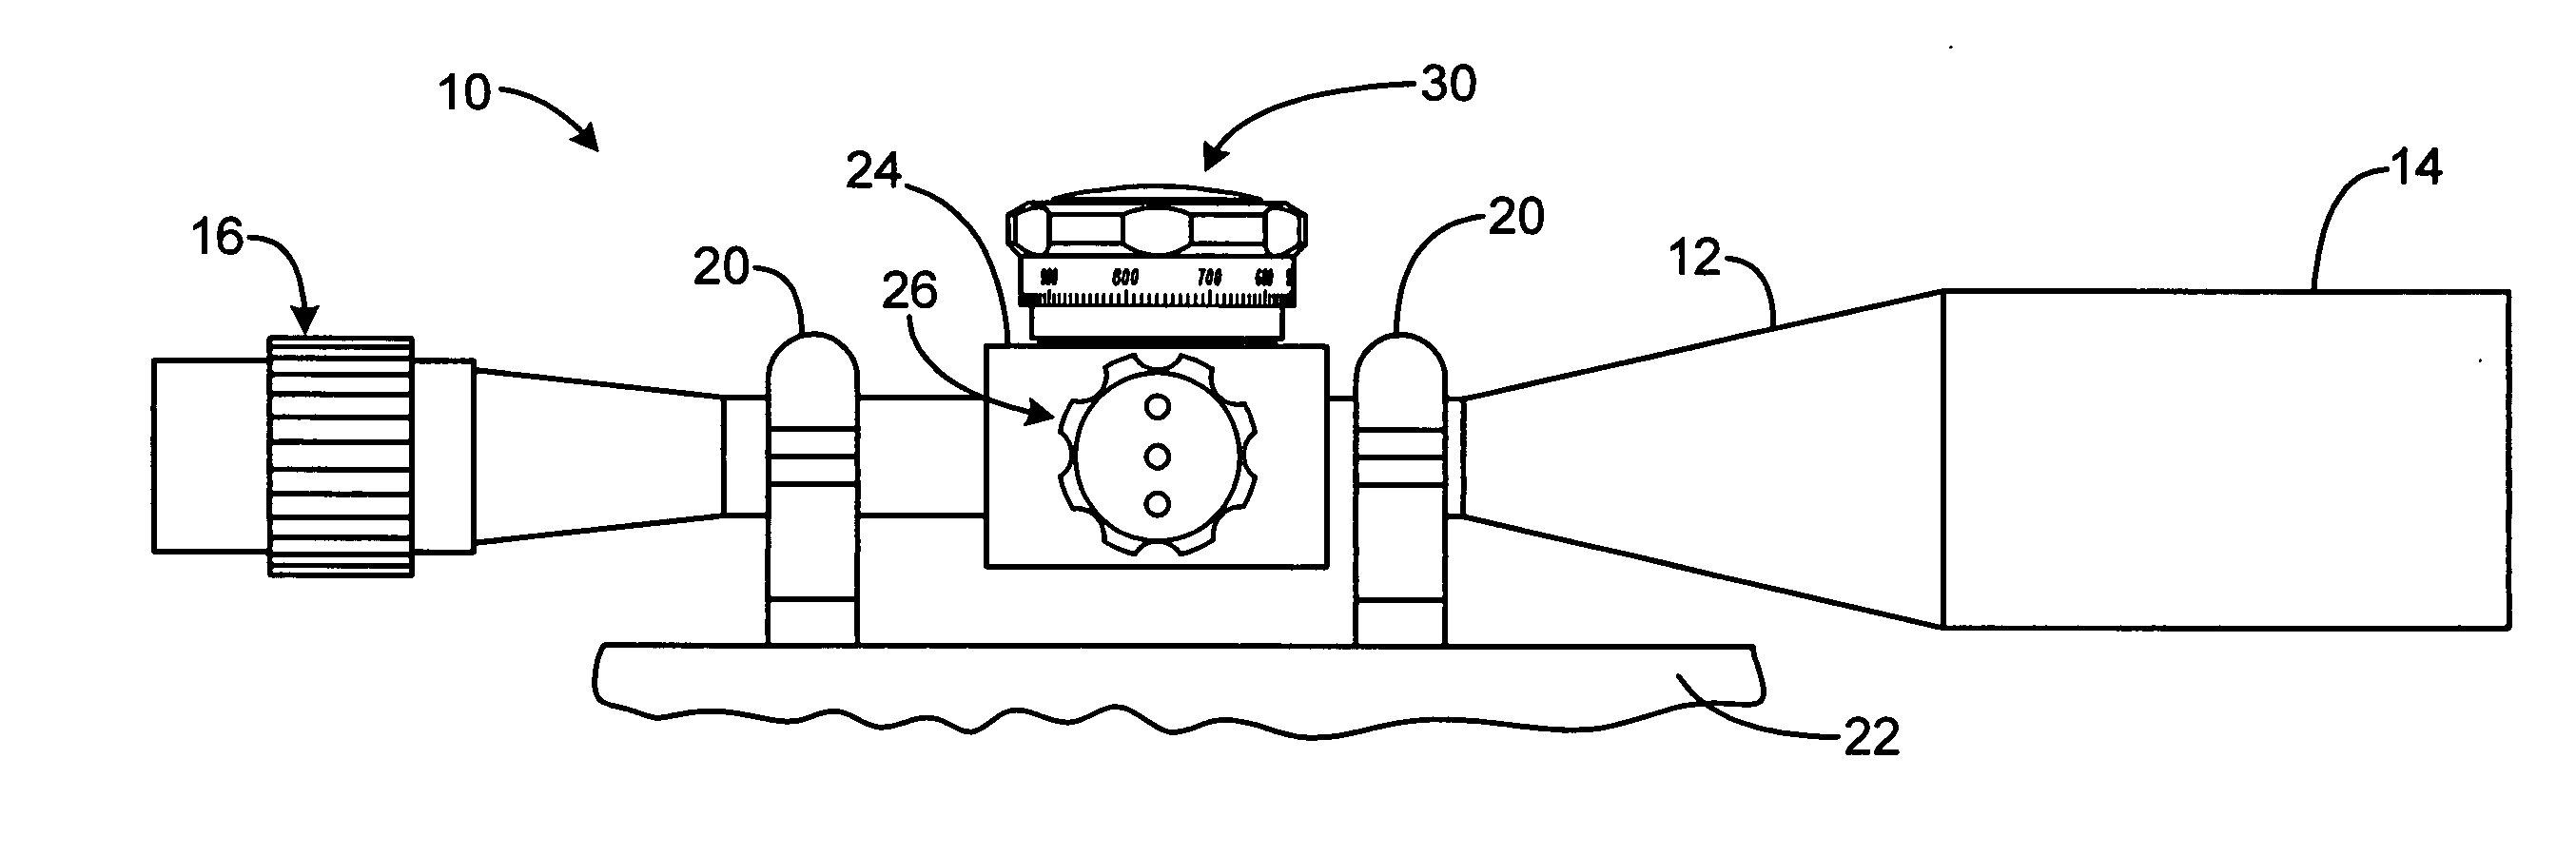 Rifle scope with adjustment knob having multiple detent forces